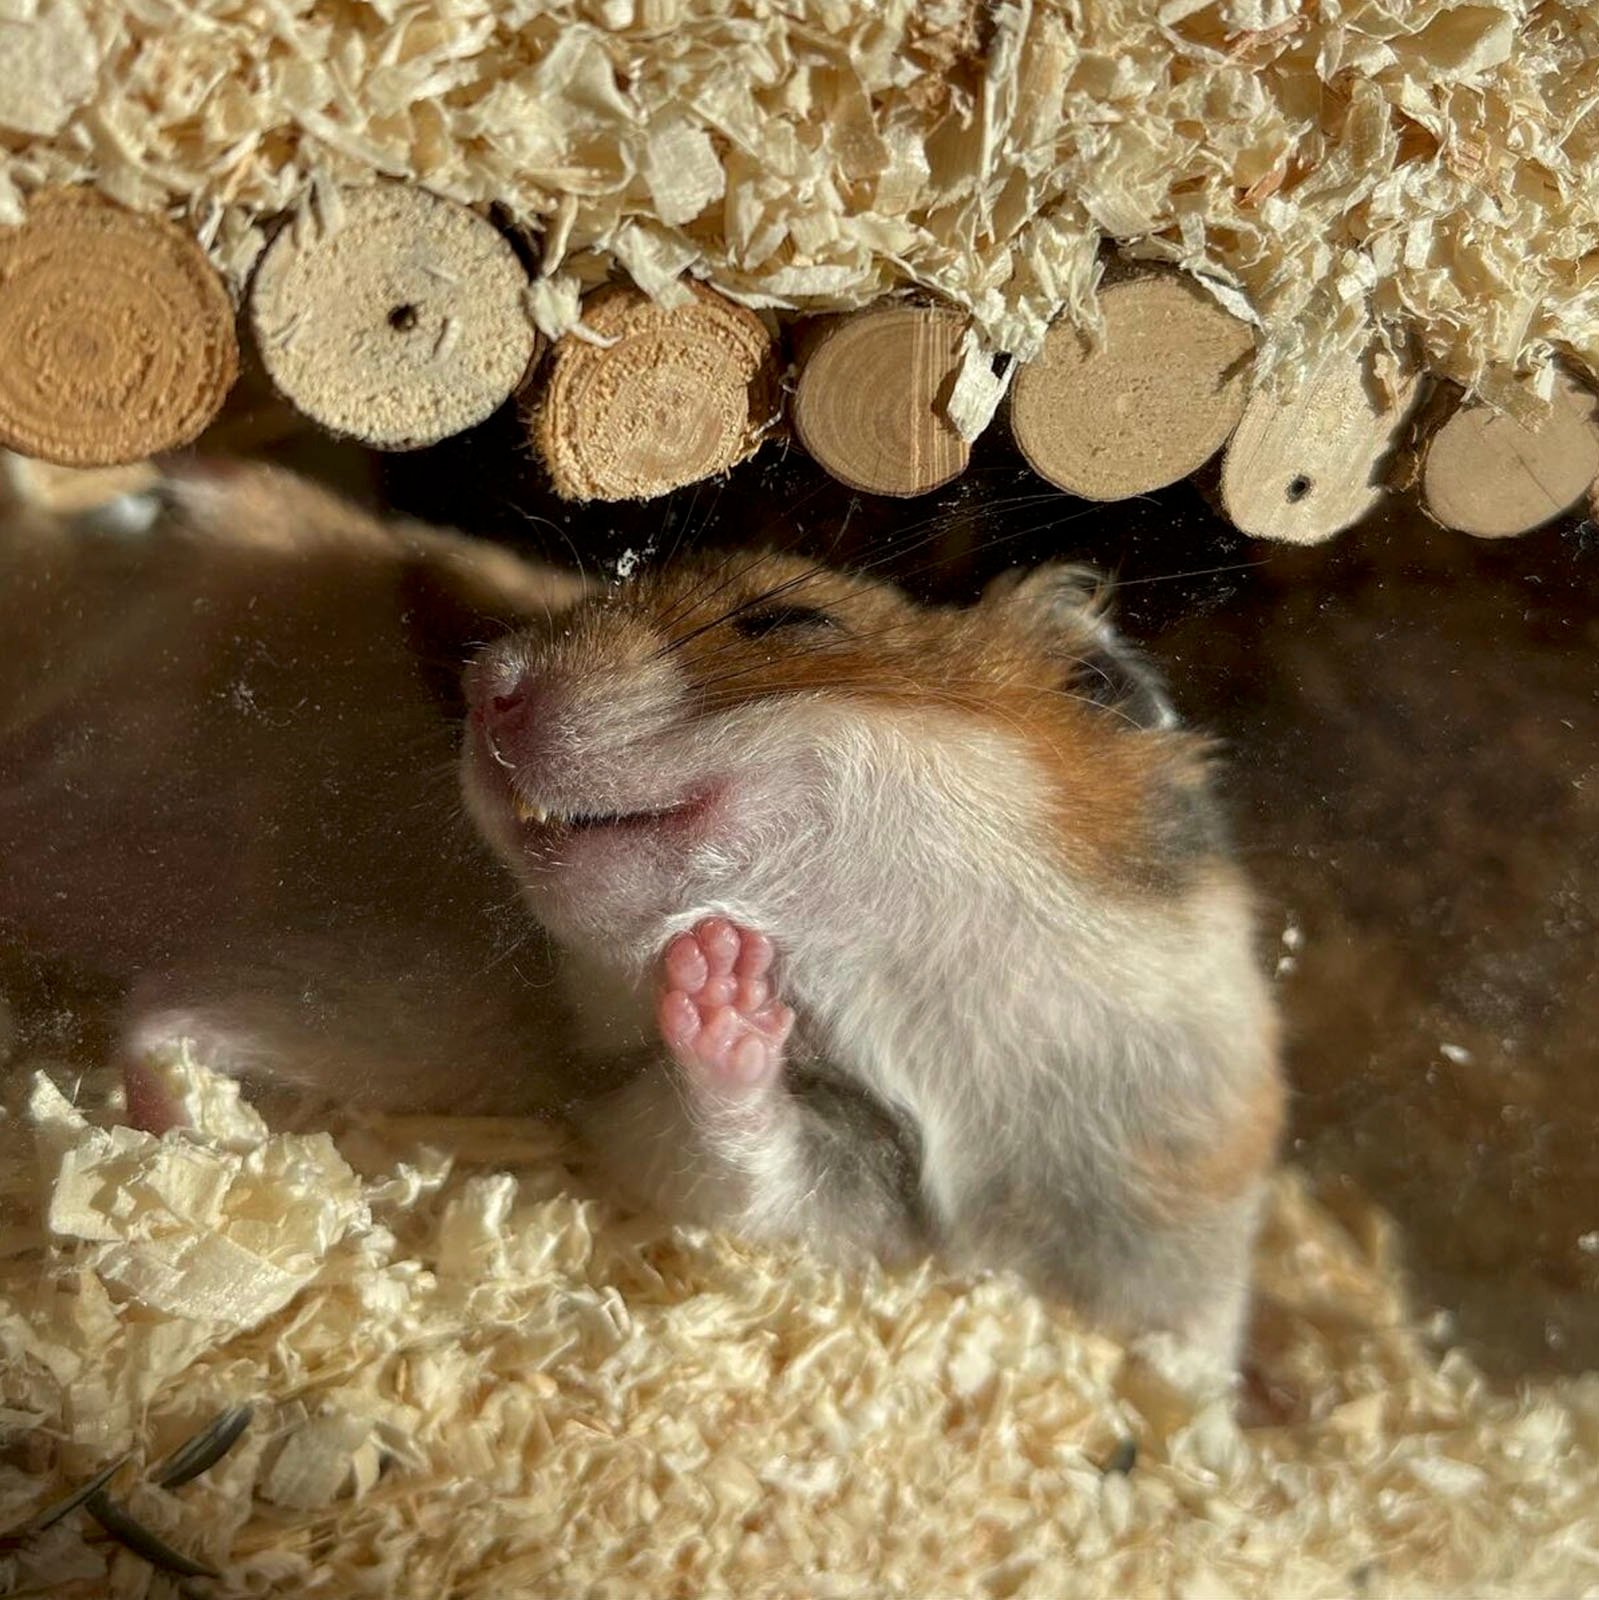 A small hamster lying on its back, peacefully sleeping under a wooden log structure with its tiny paws raised and nestled in soft bedding.